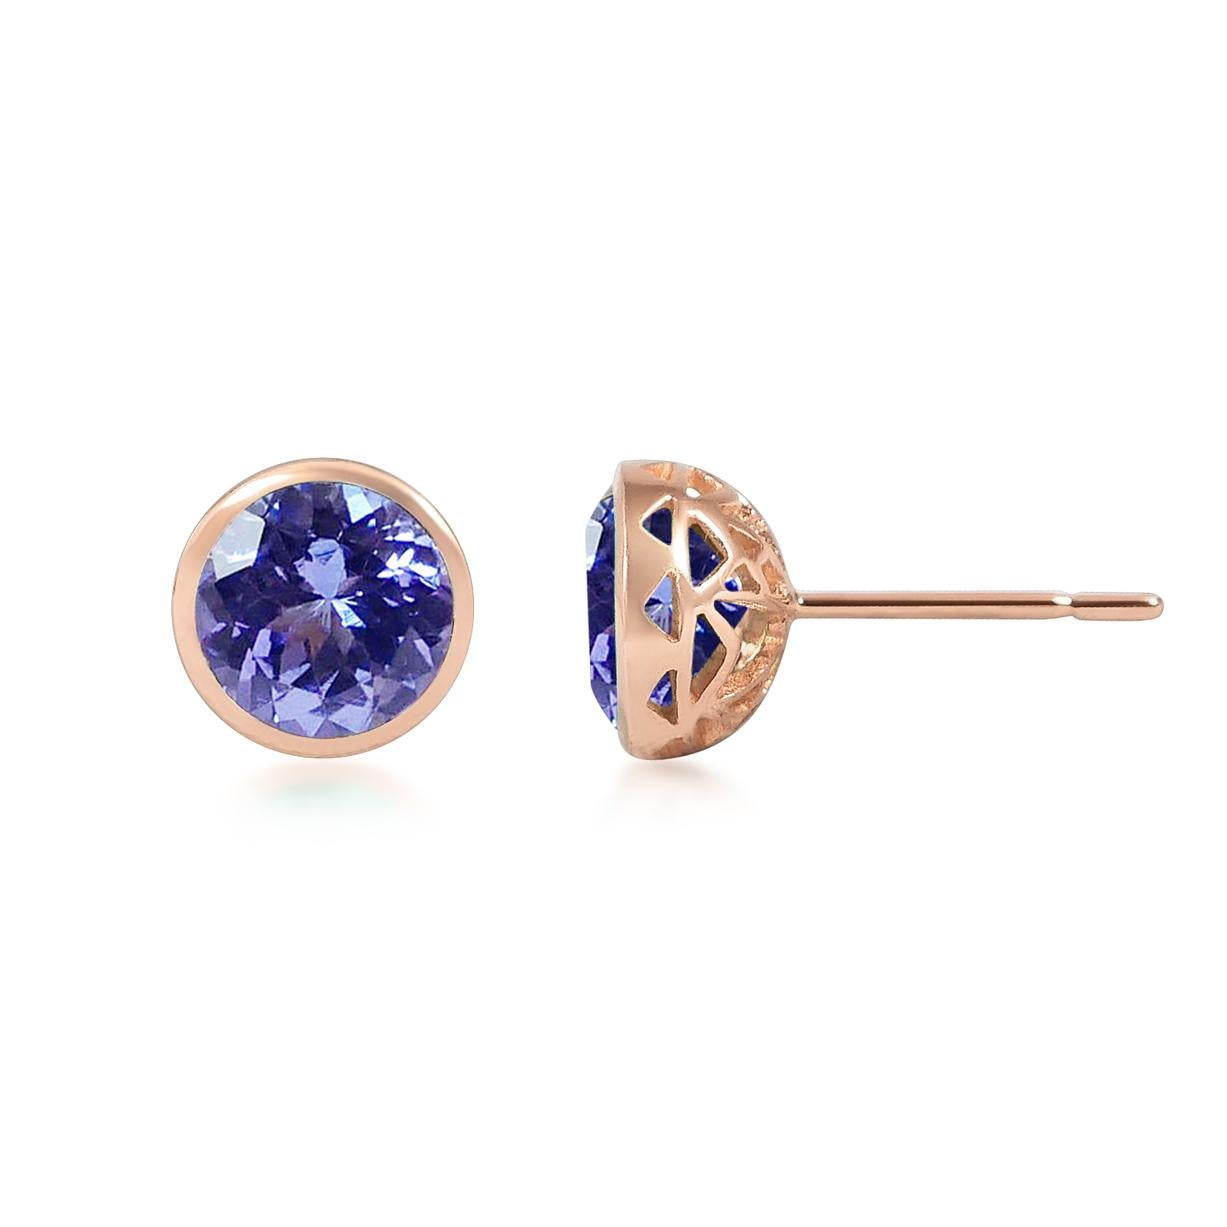 Brilliant Cut Handcrafted 2.80 Carats Tanzanite 18 Karat Rose Gold Stud Earrings For Sale